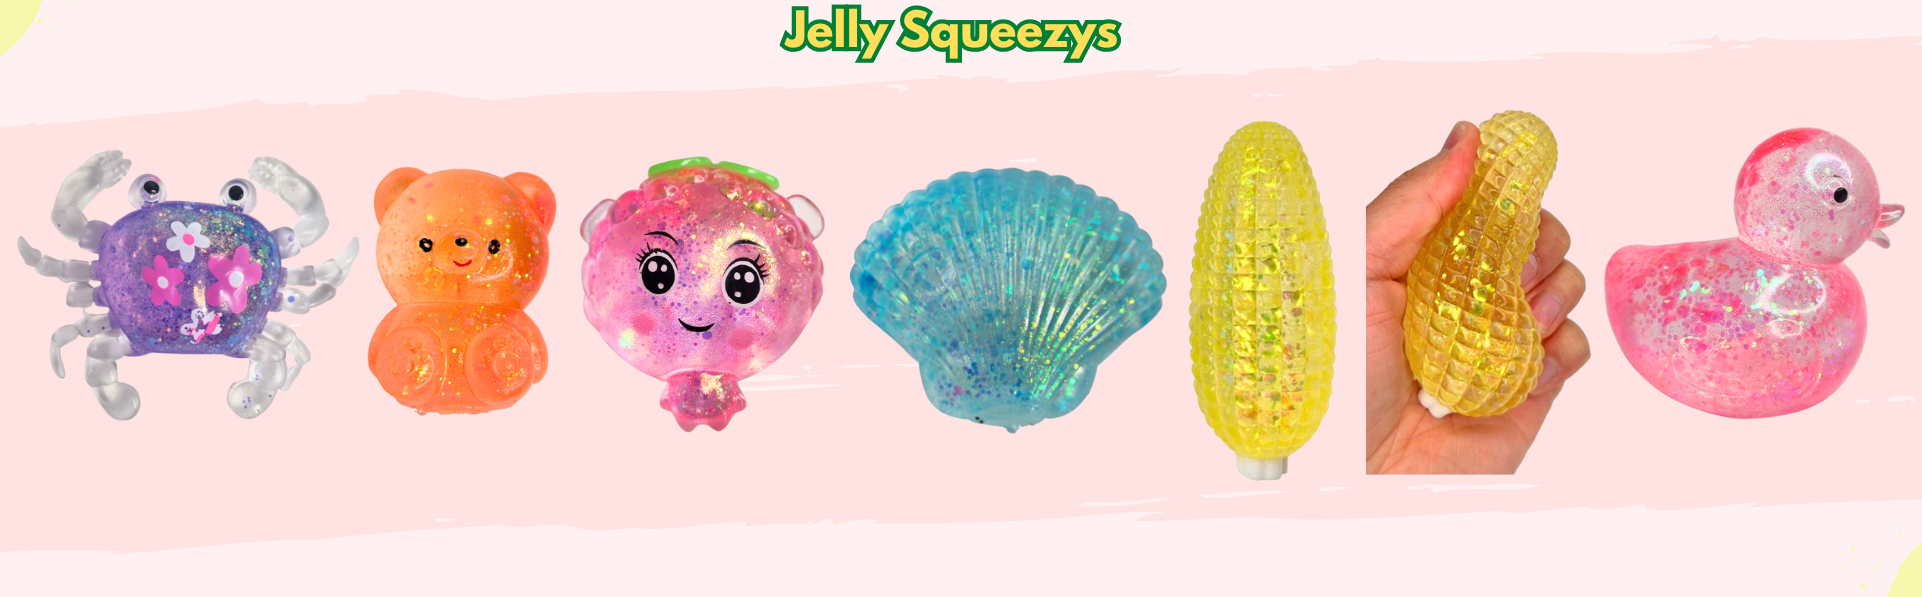 Jelly Squeezies